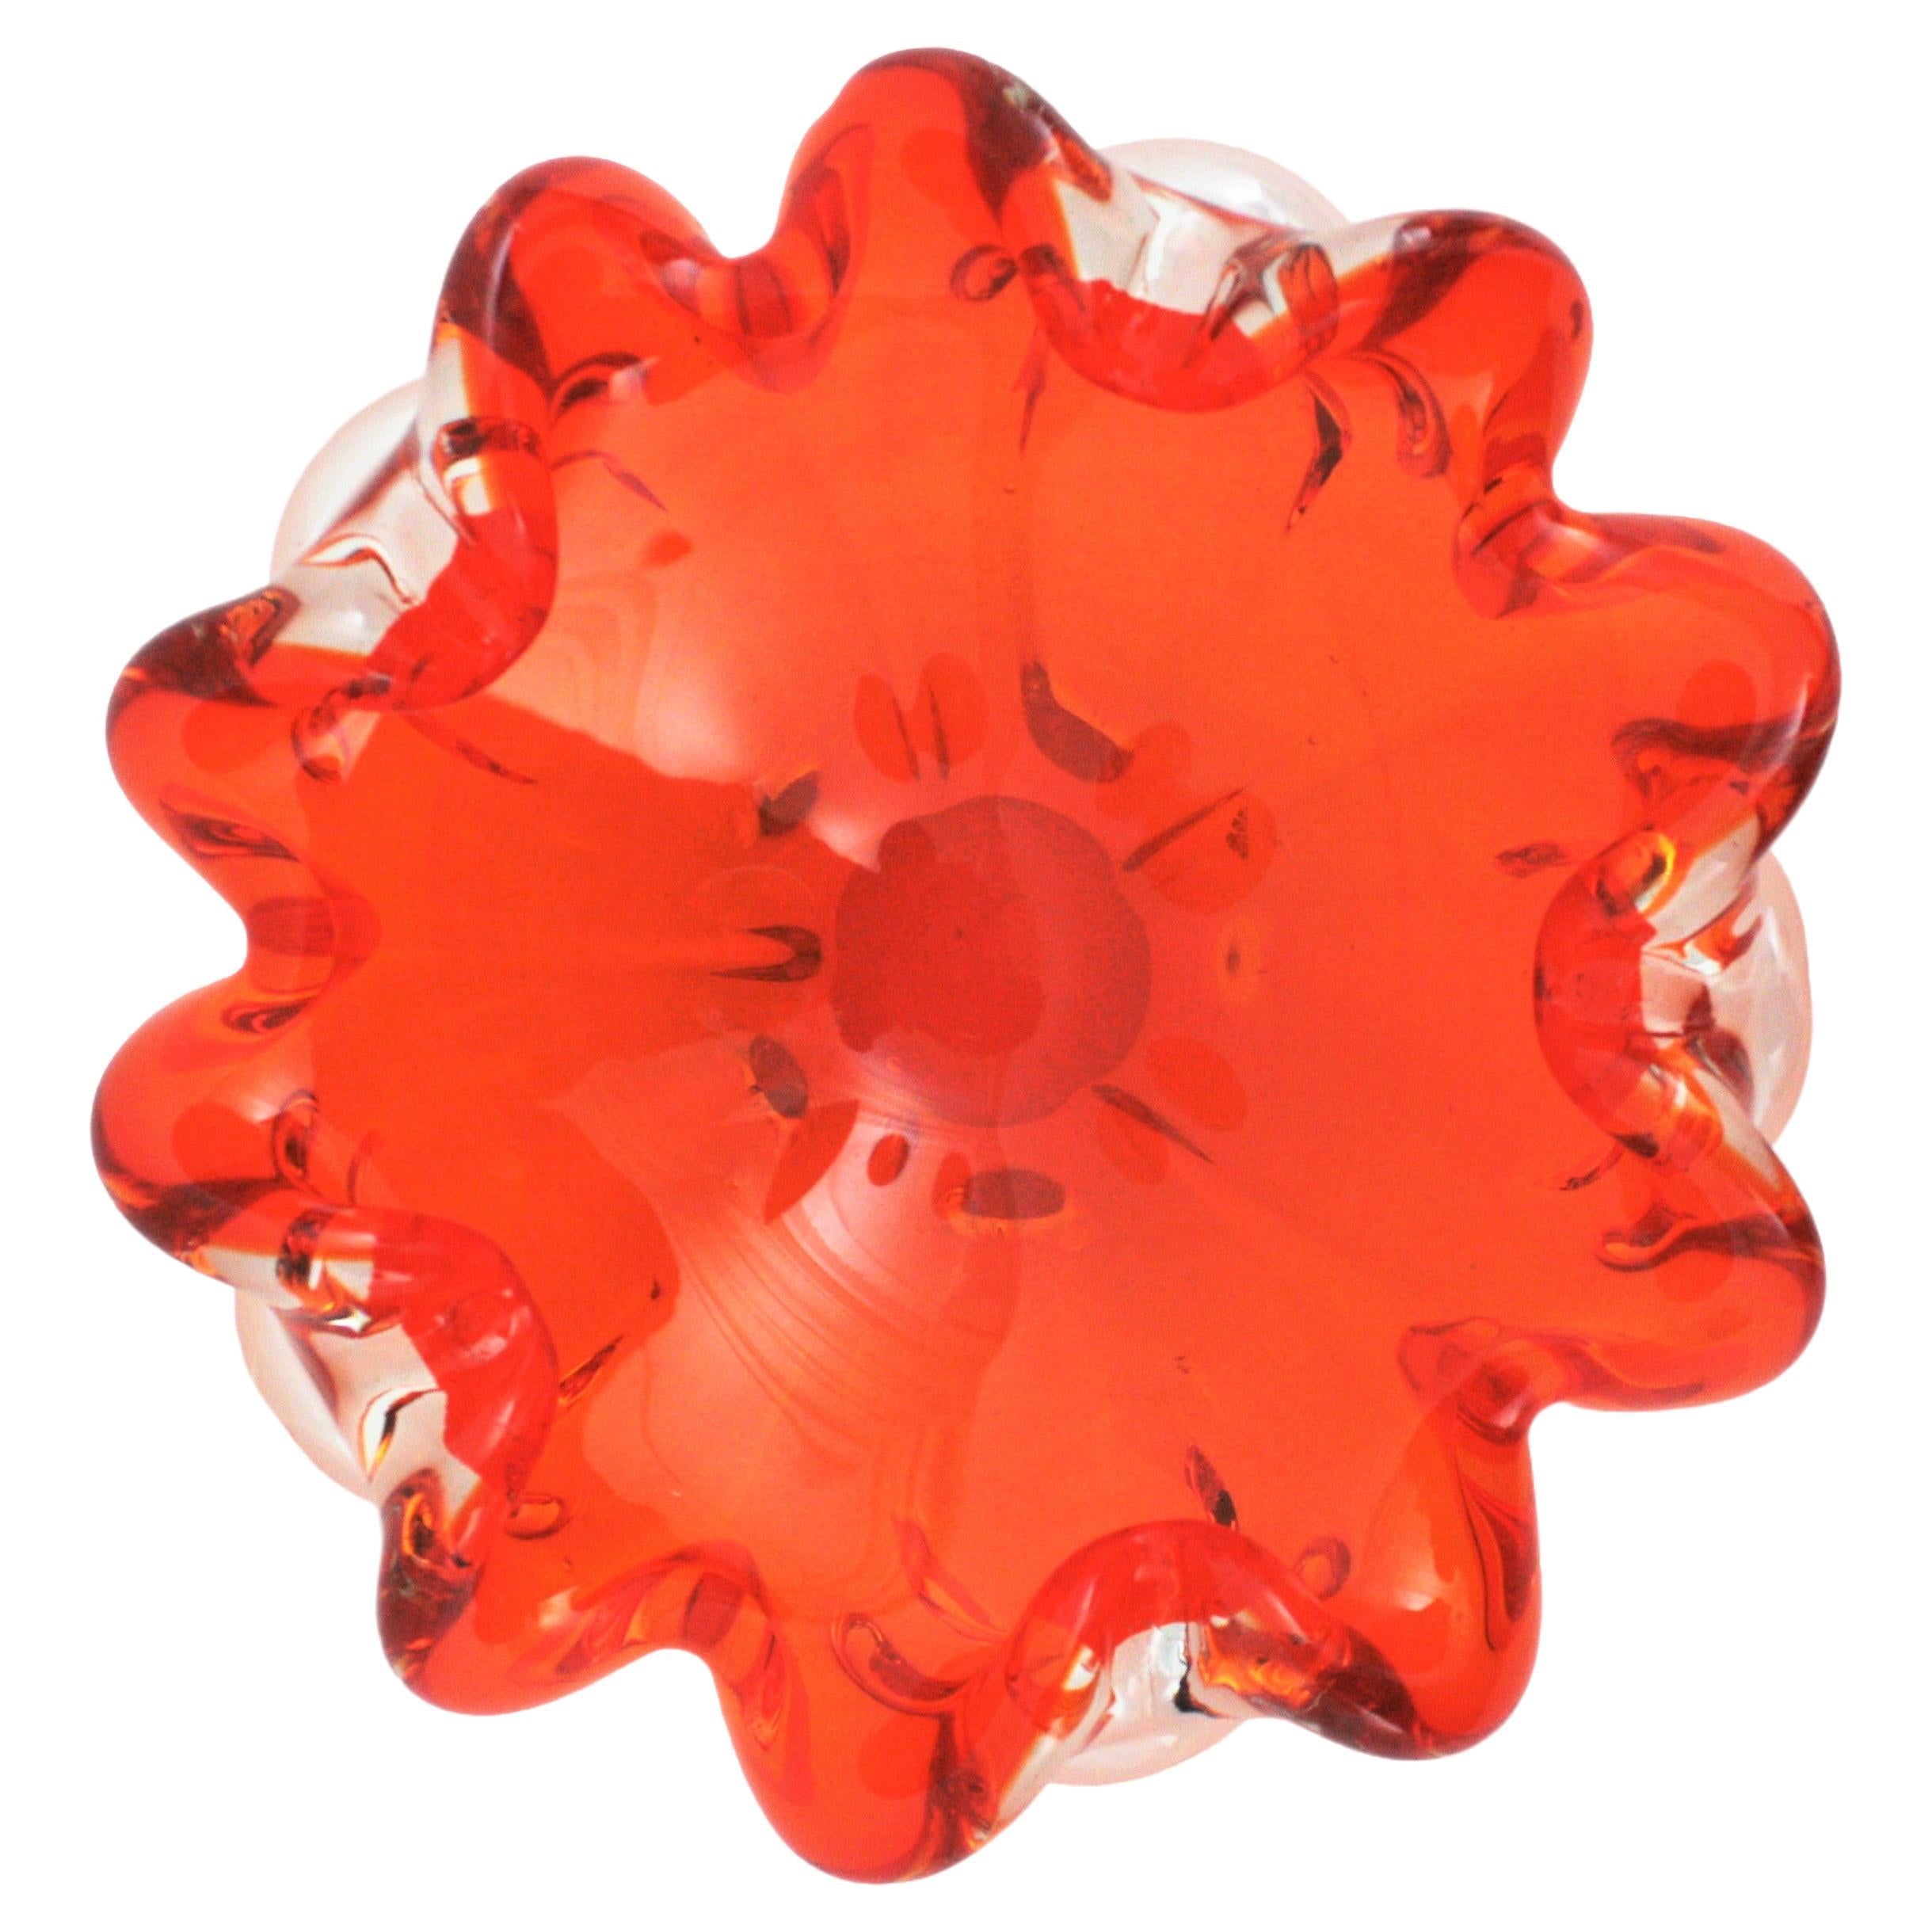 Midcentury Italian Murano Sommerso Orange and Clear Art Glass Bowl / Ashtray For Sale